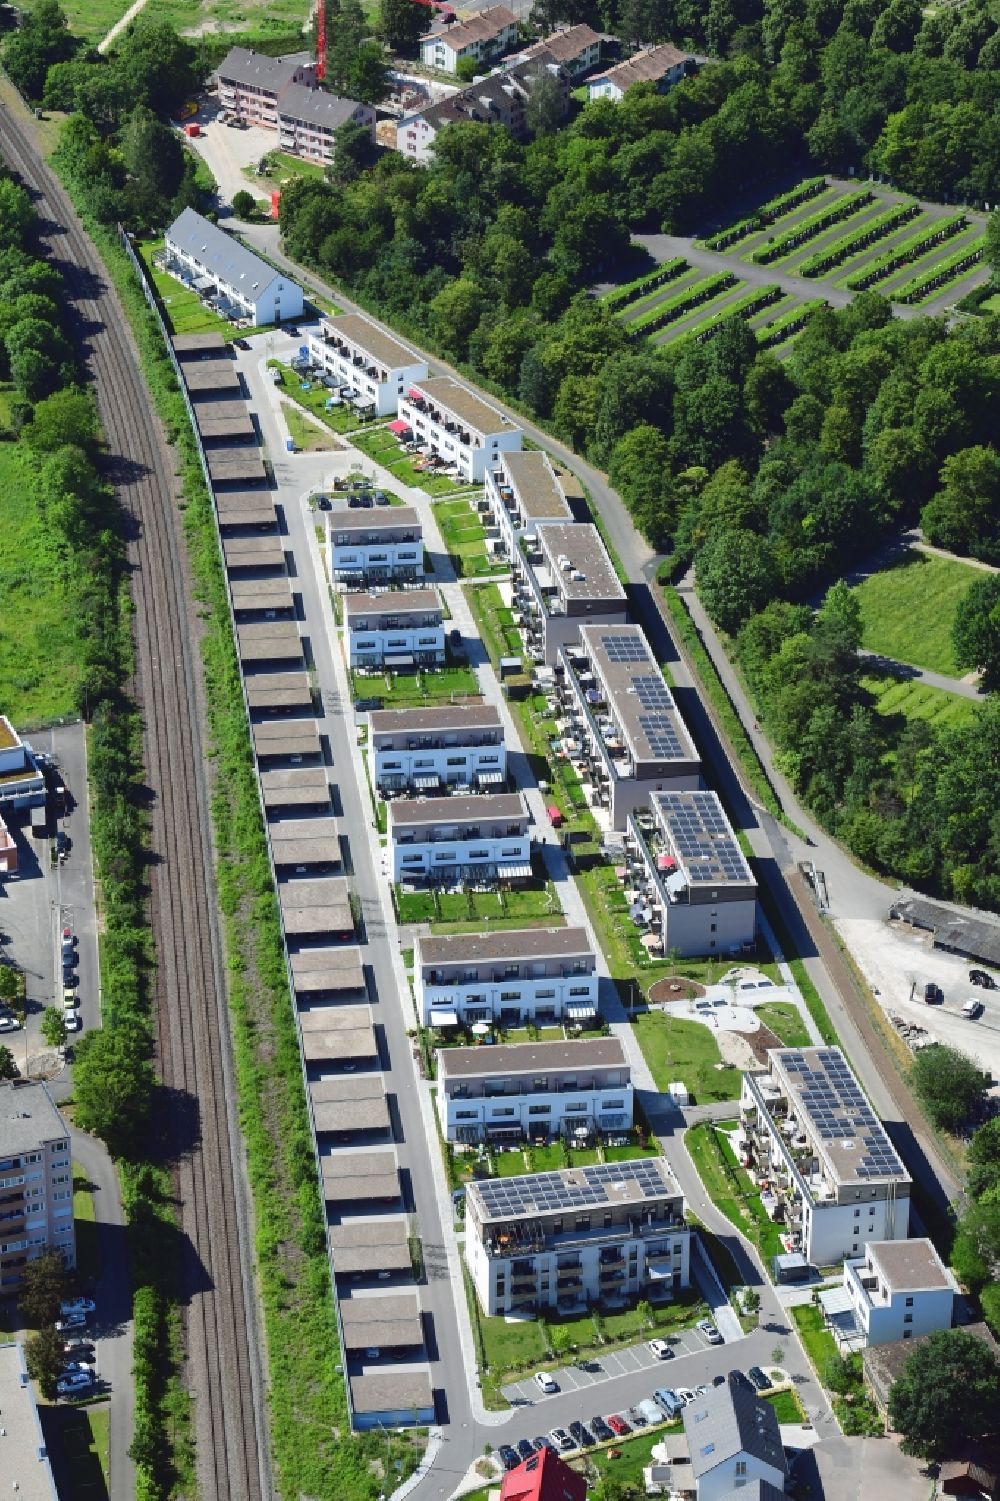 Grenzach-Wyhlen from above - Construction site to build a new multi-family residential complex in Grenzach-Wyhlen in the state Baden-Wuerttemberg, Germany